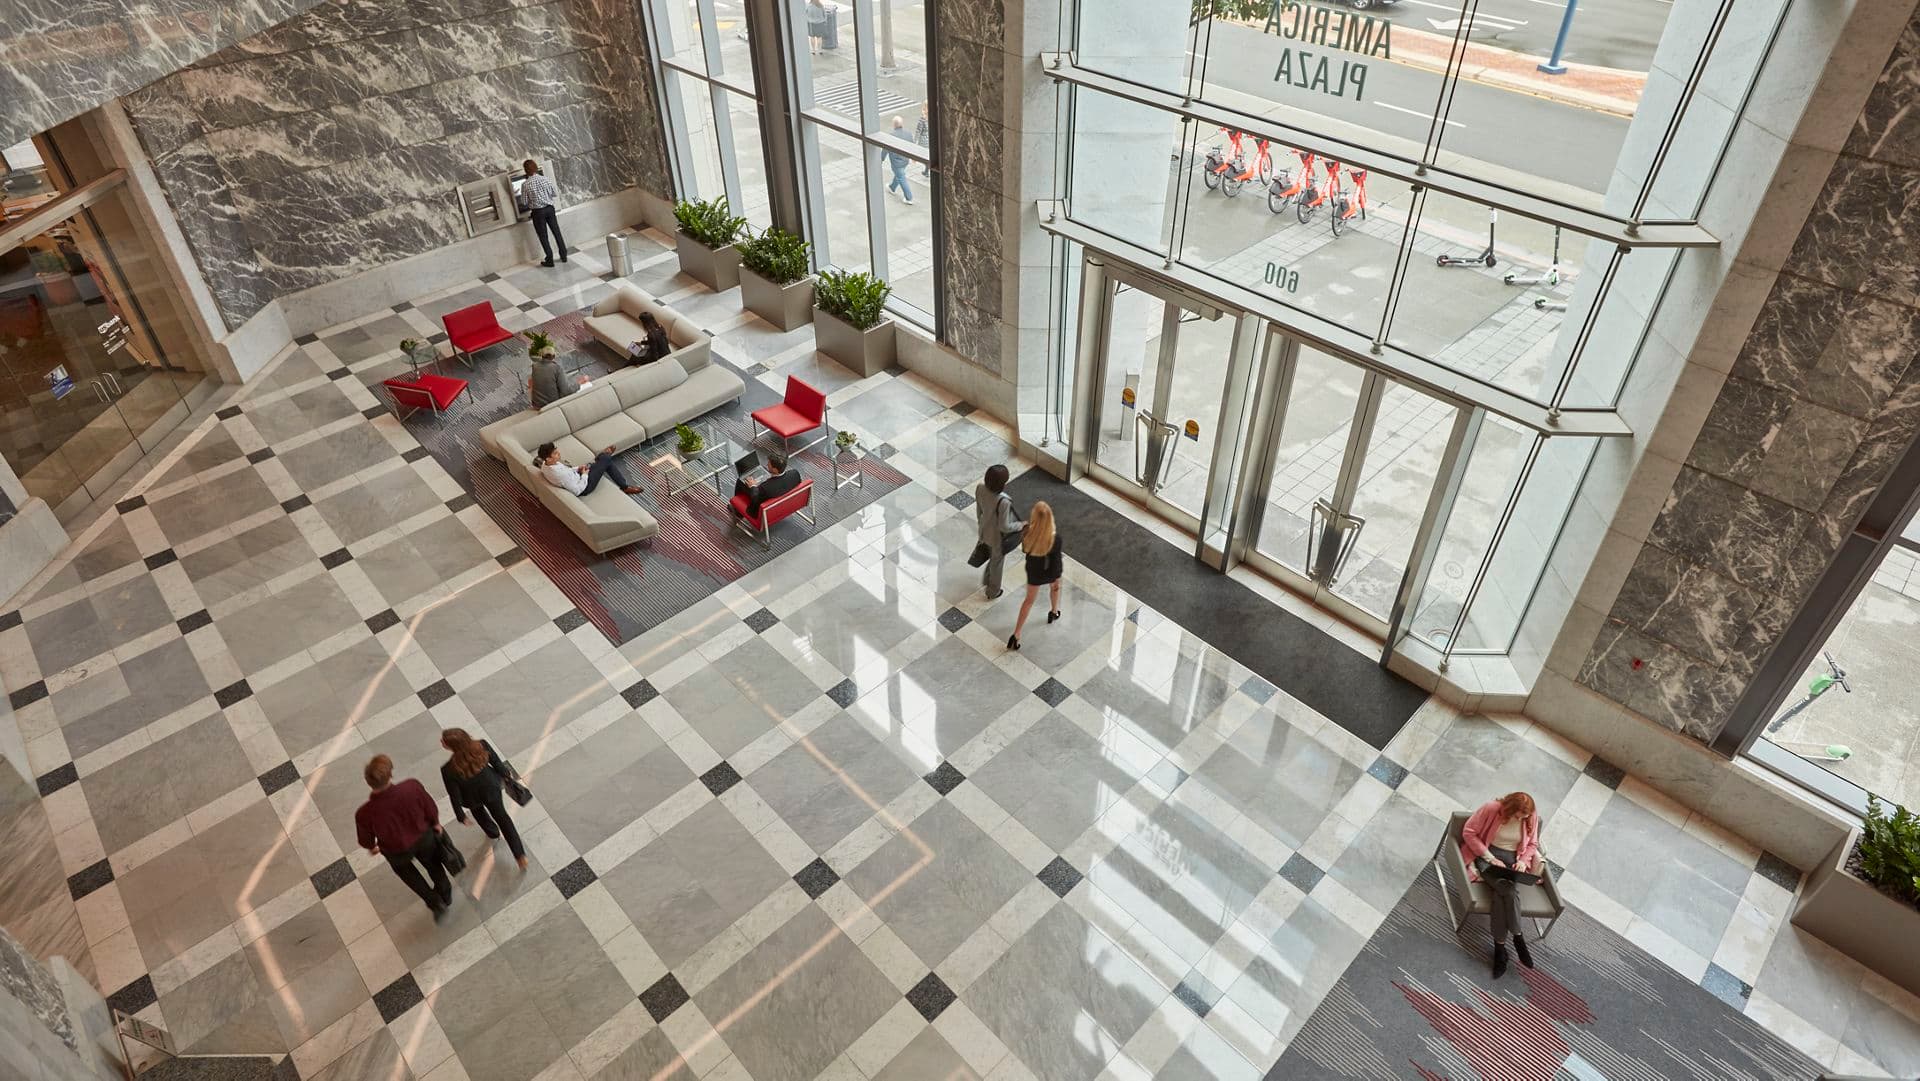 Lifestyle photography of the lobby at One America Plaza - 600 West Broadway in San Diego, CA